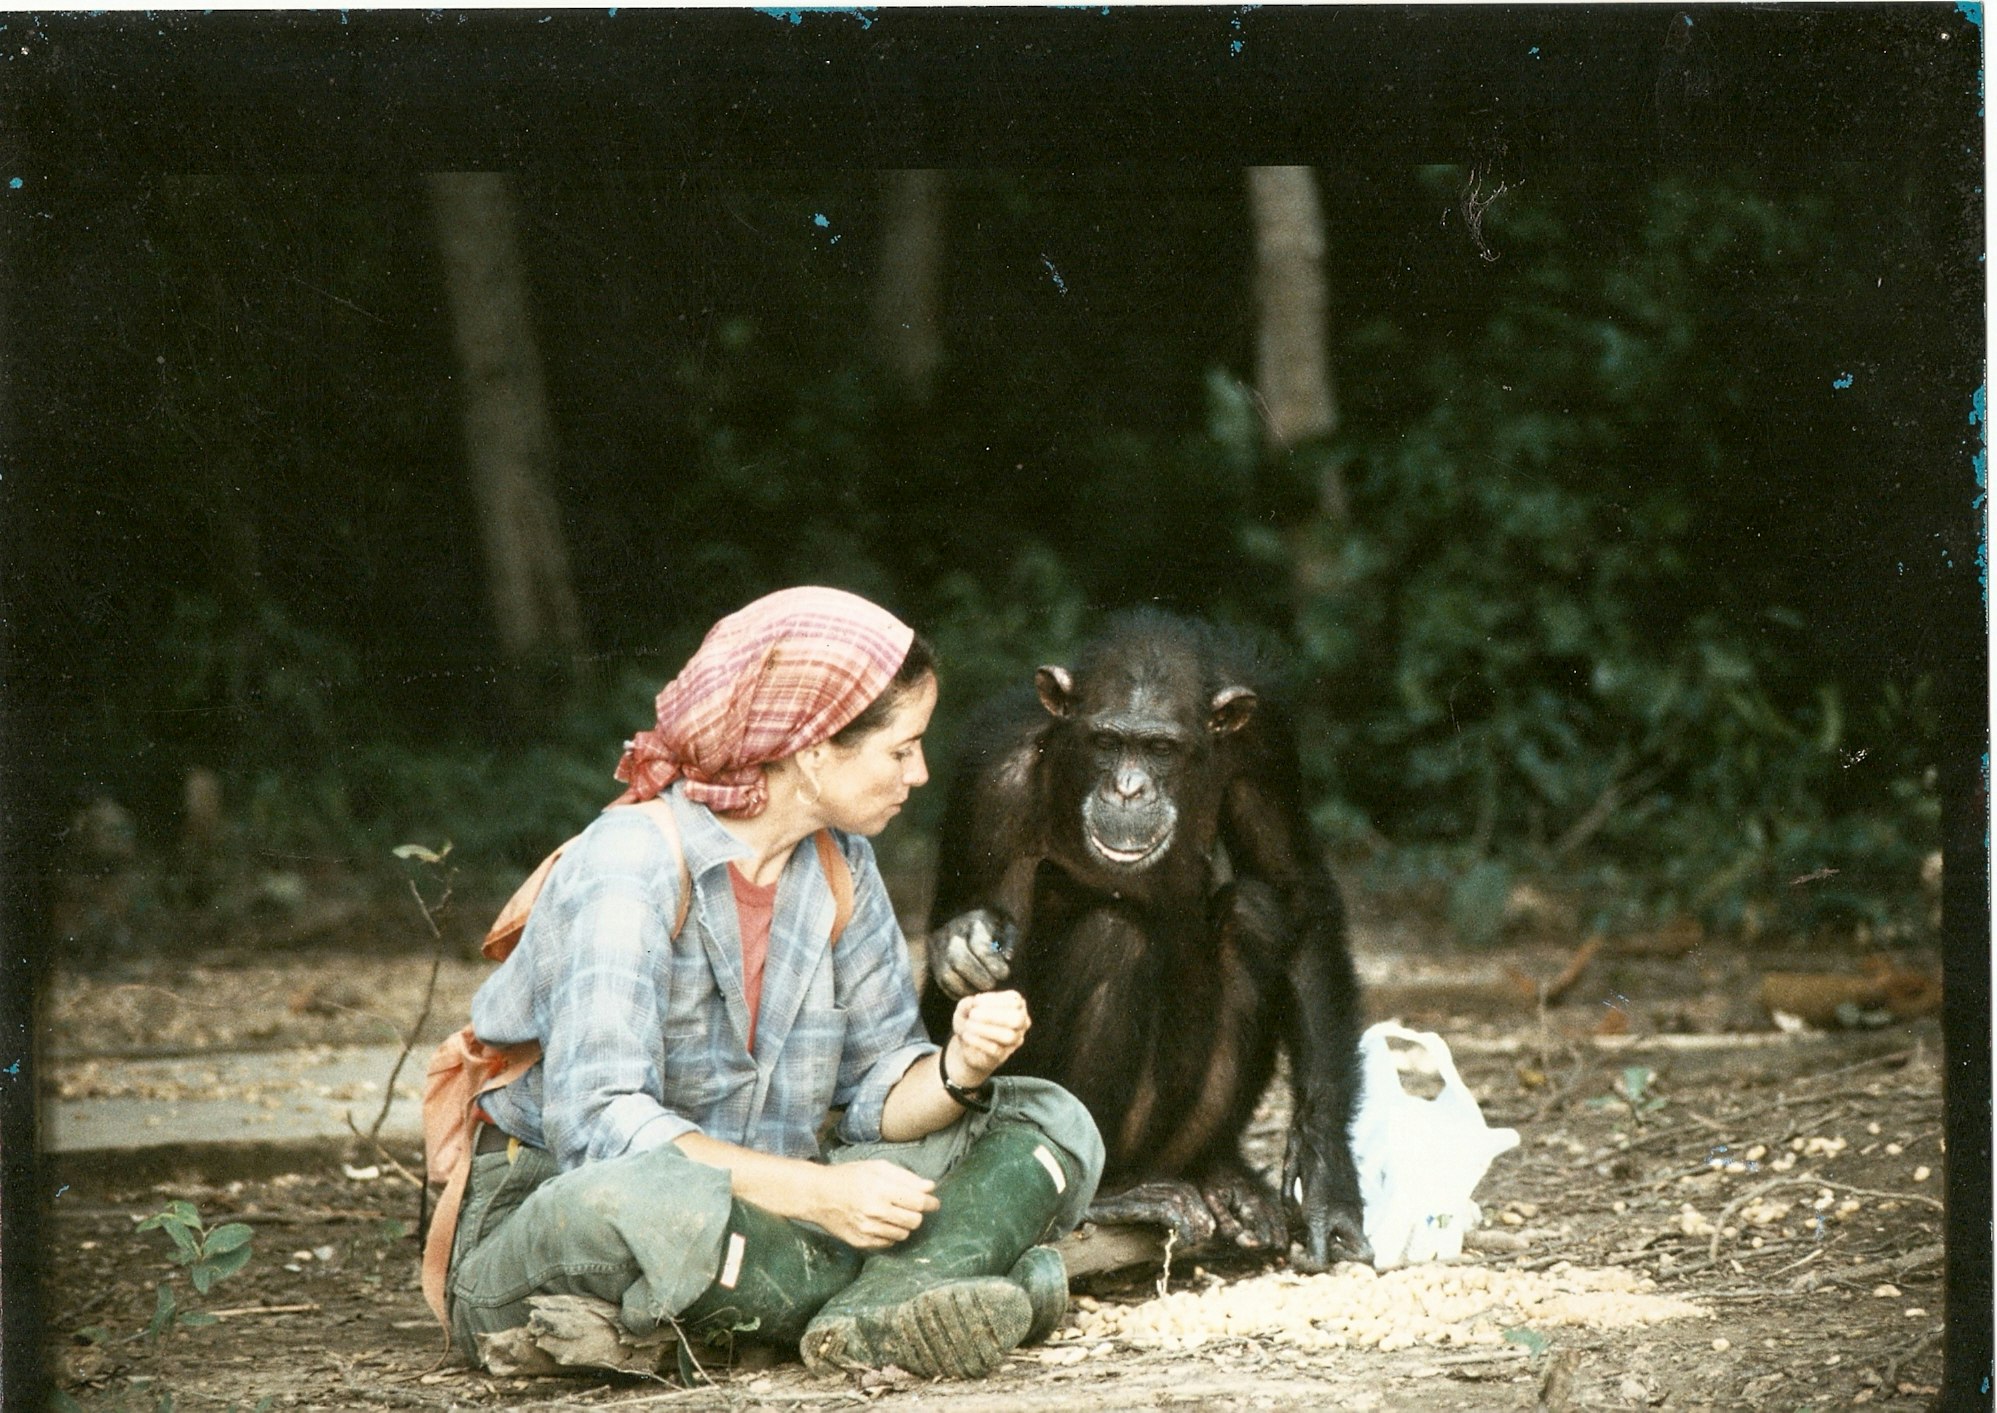 Janis Carter, wearing a scarf over her head and wellington boots, sits cross-legged on the ground next to the chimp Lucy.